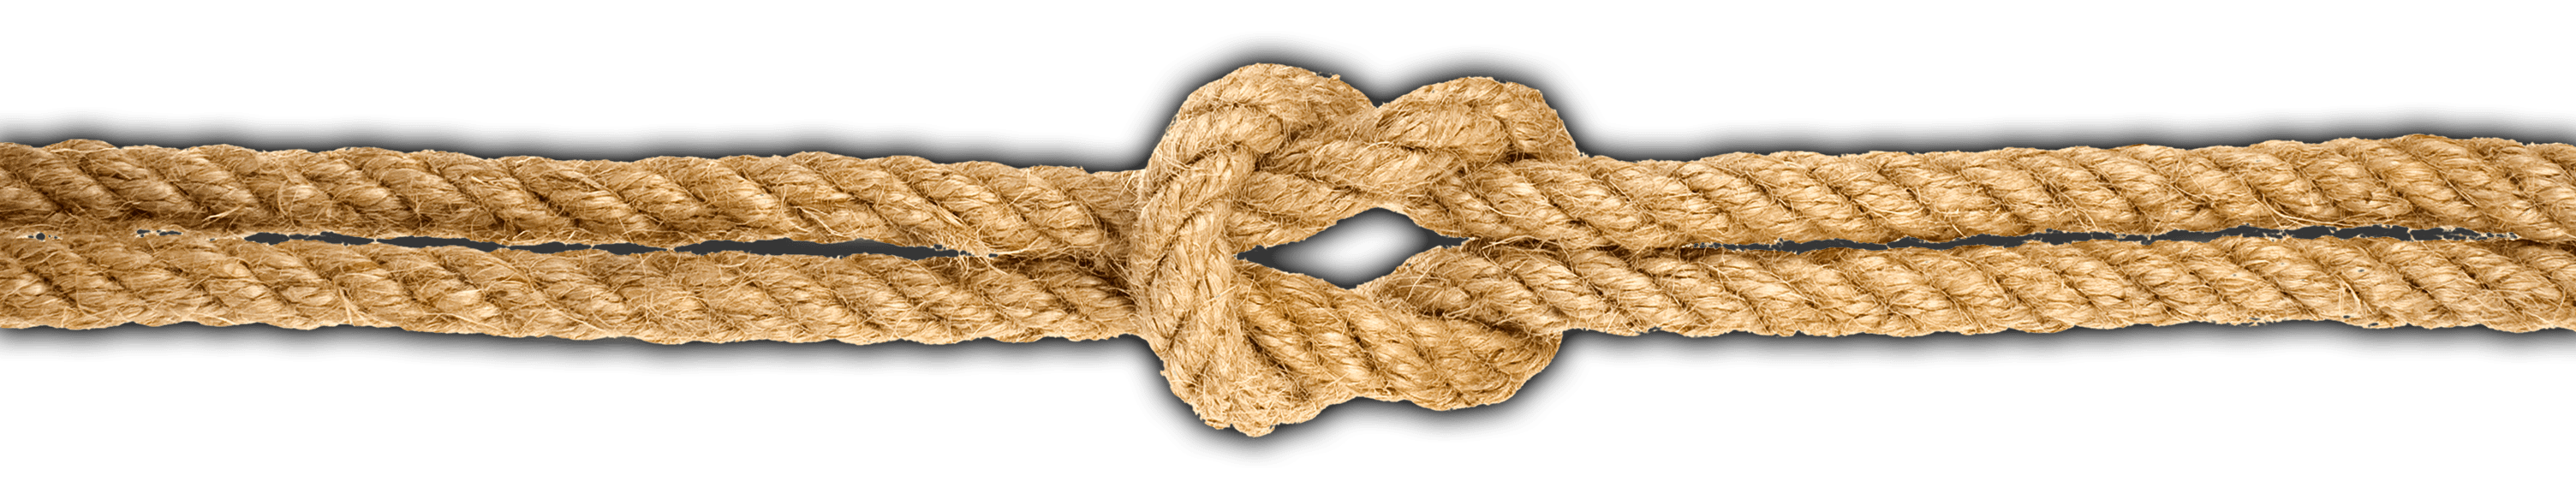 knotted rope background image